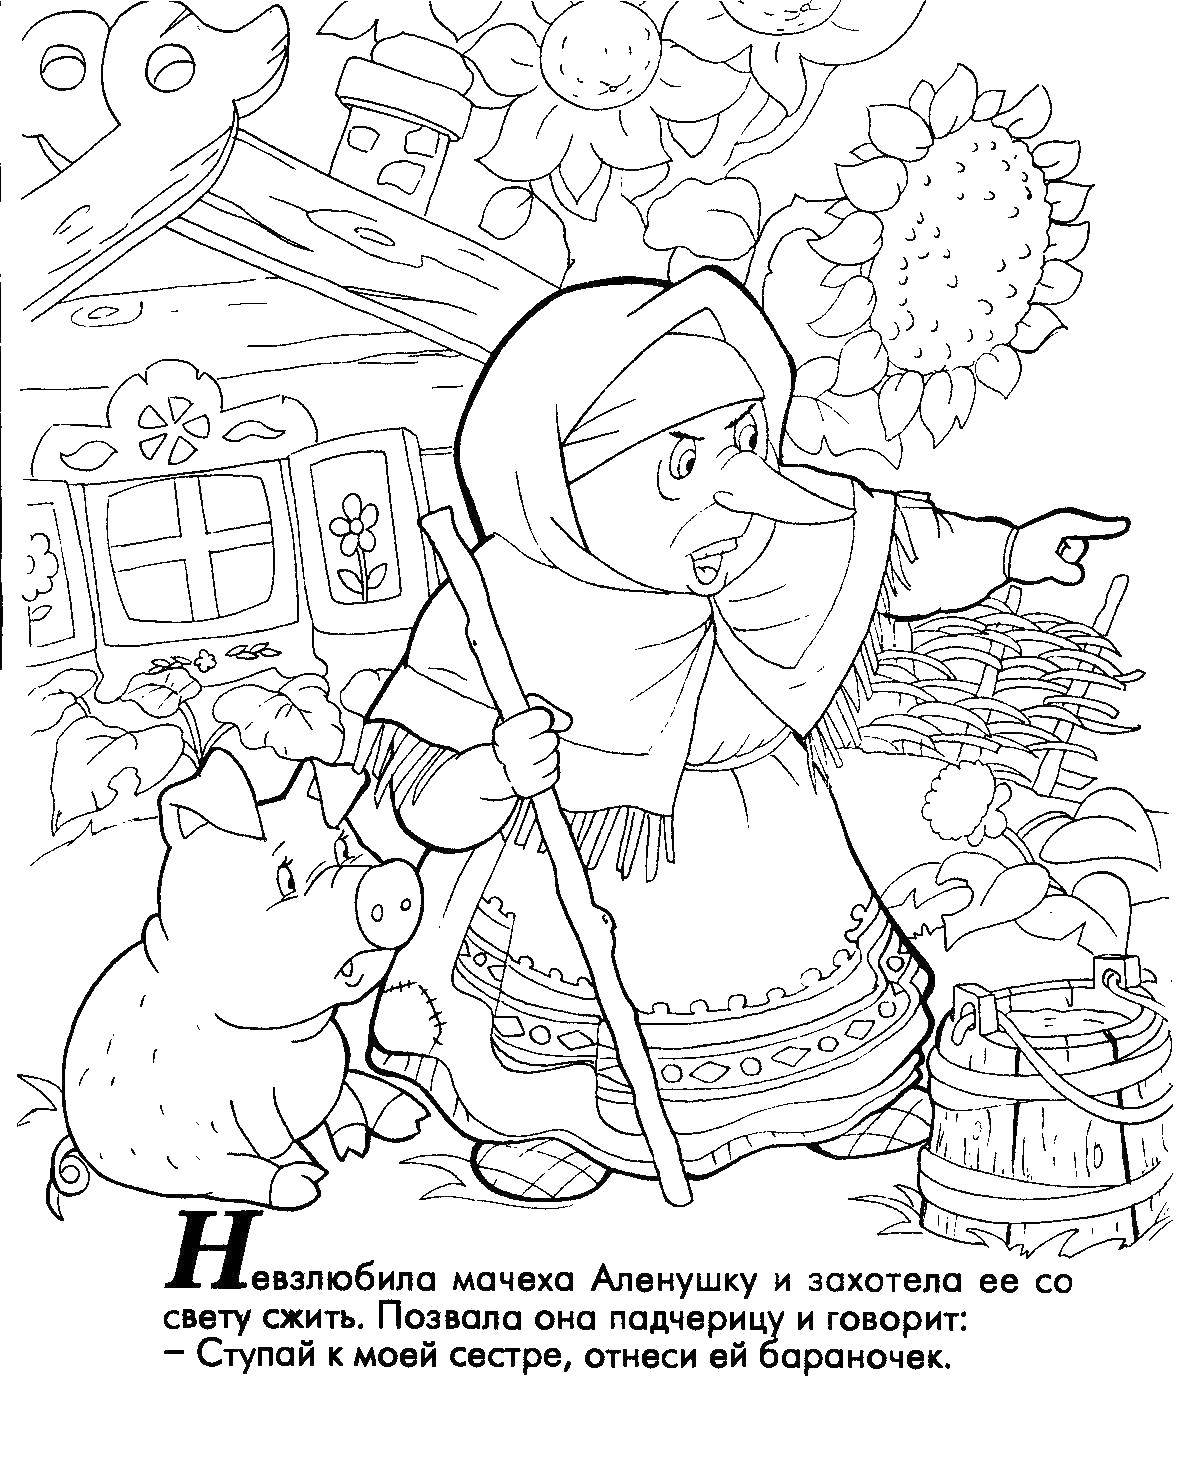 Coloring Tale. Category Fairy tales. Tags:  Fairy tales.